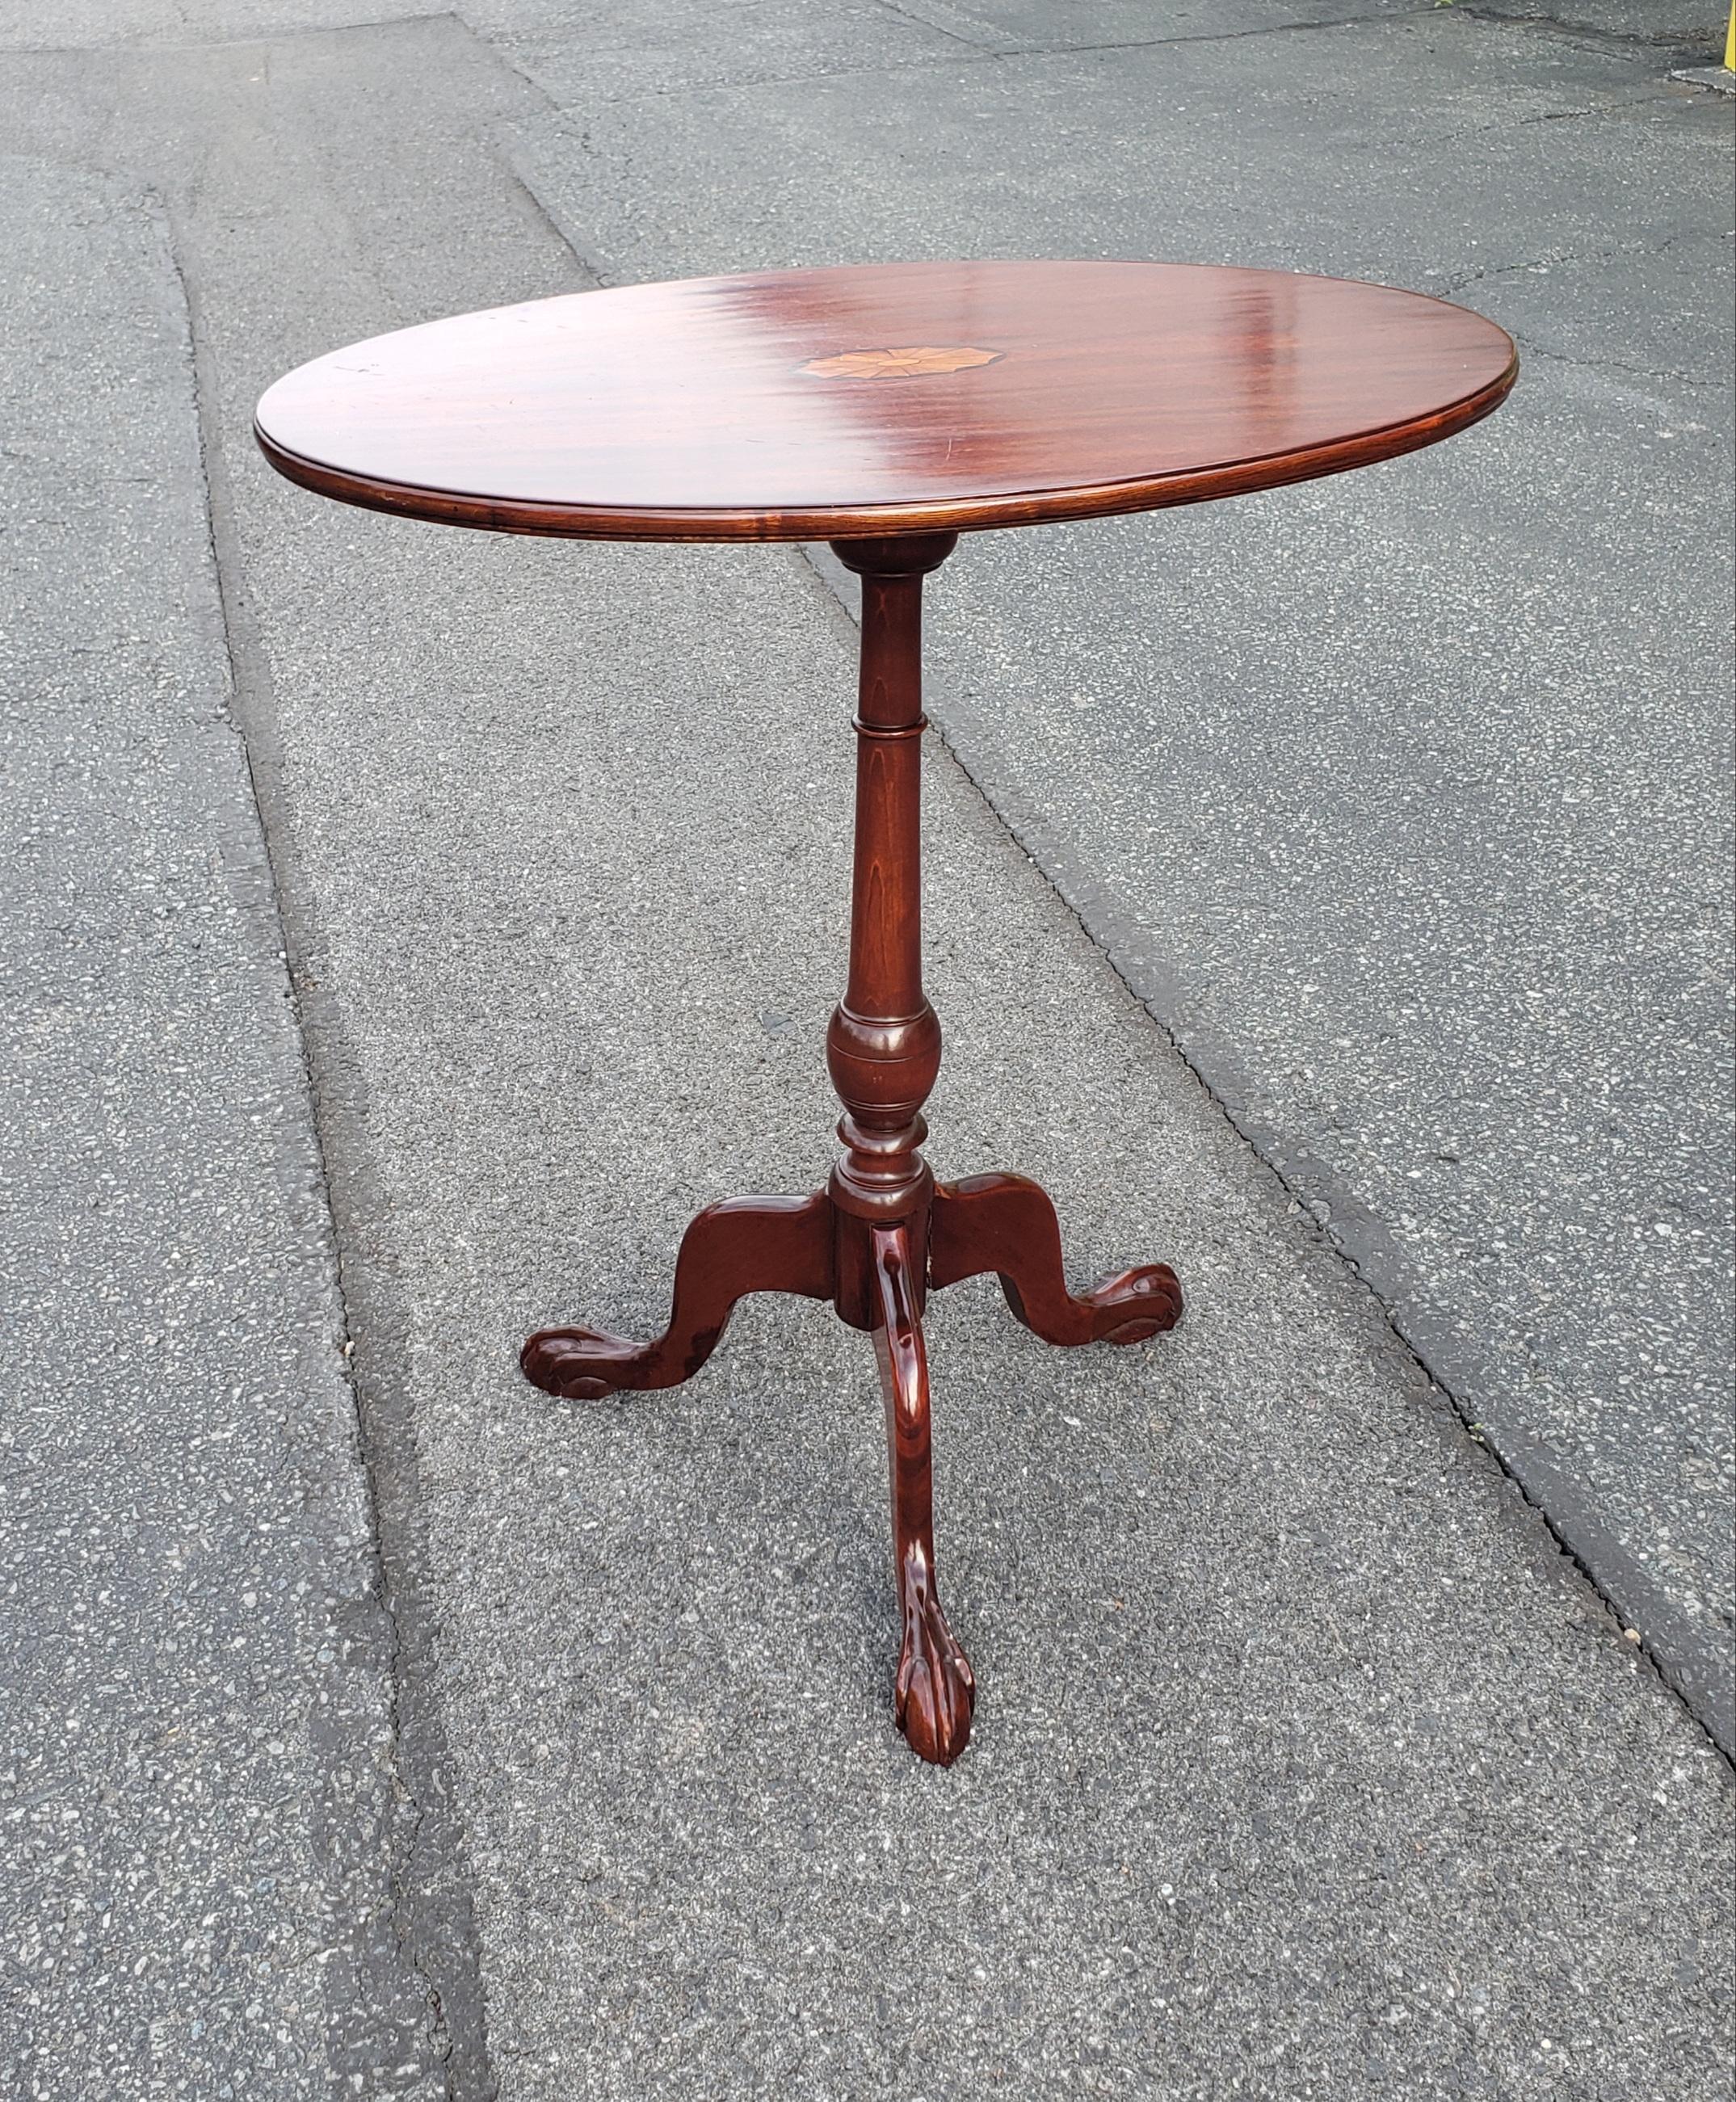 Mahogany Inlaid Tilt-Top Tea Table Side Table with Tripod ClawFeet In Good Condition For Sale In Germantown, MD